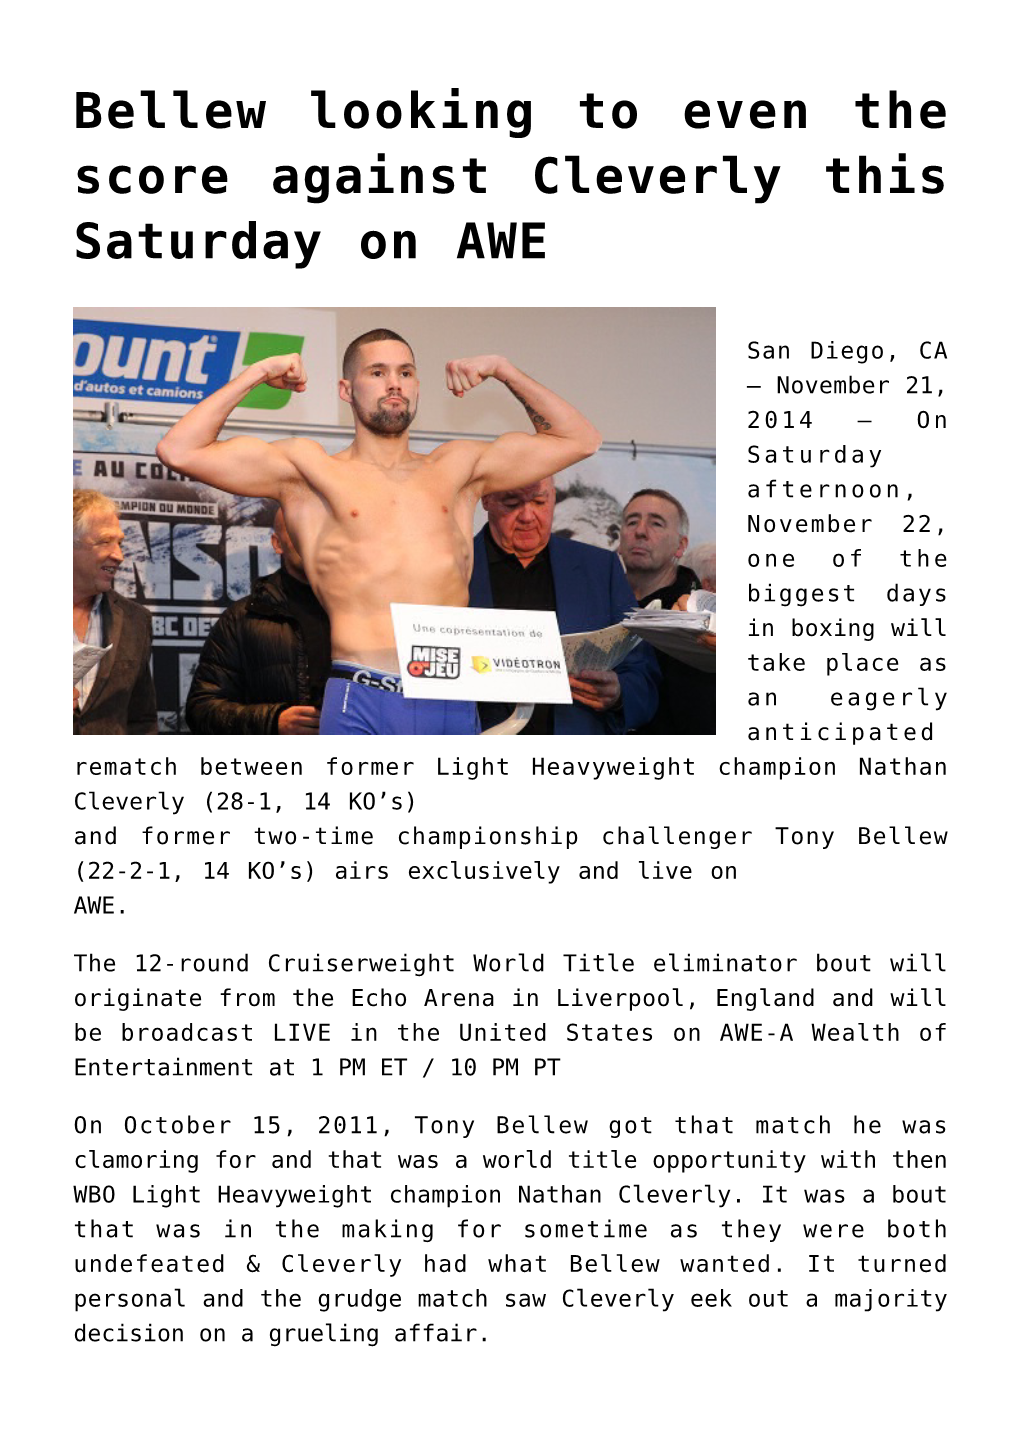 Bellew Looking to Even the Score Against Cleverly This Saturday on AWE